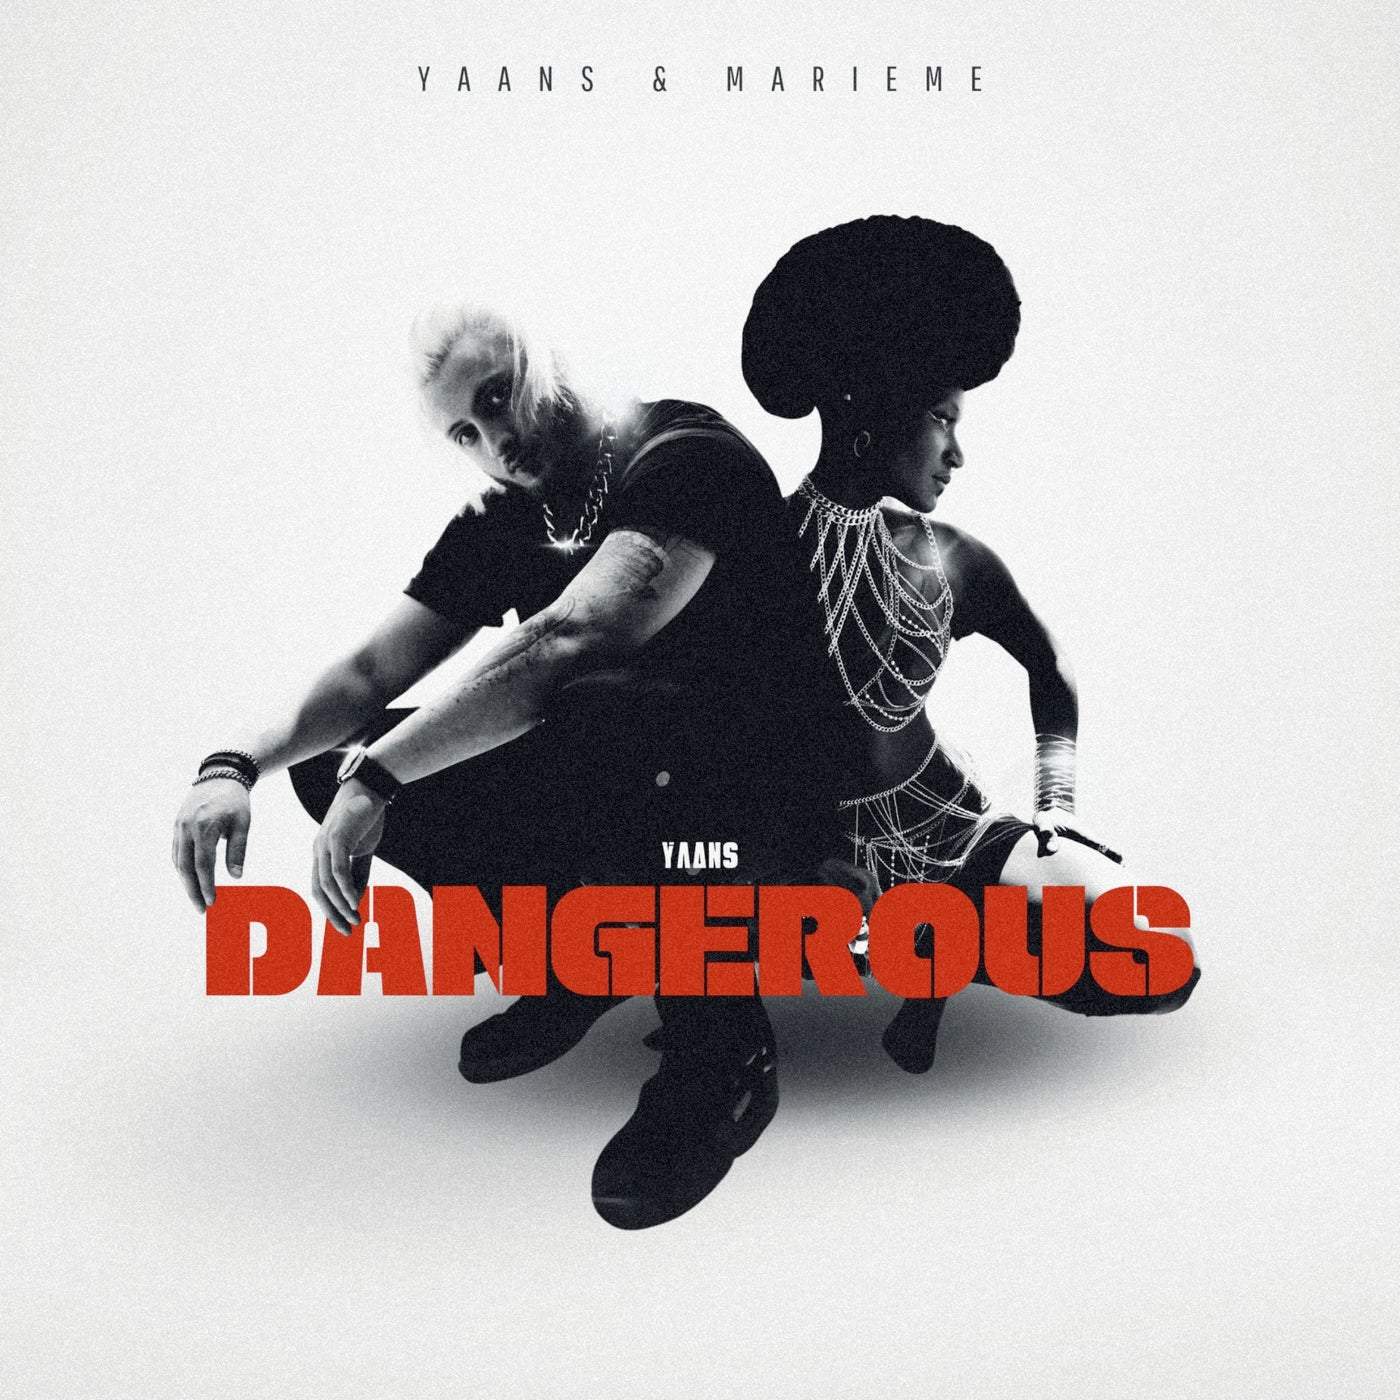 image cover: Dangerous by Marieme, Yaans on Yaans Music Production